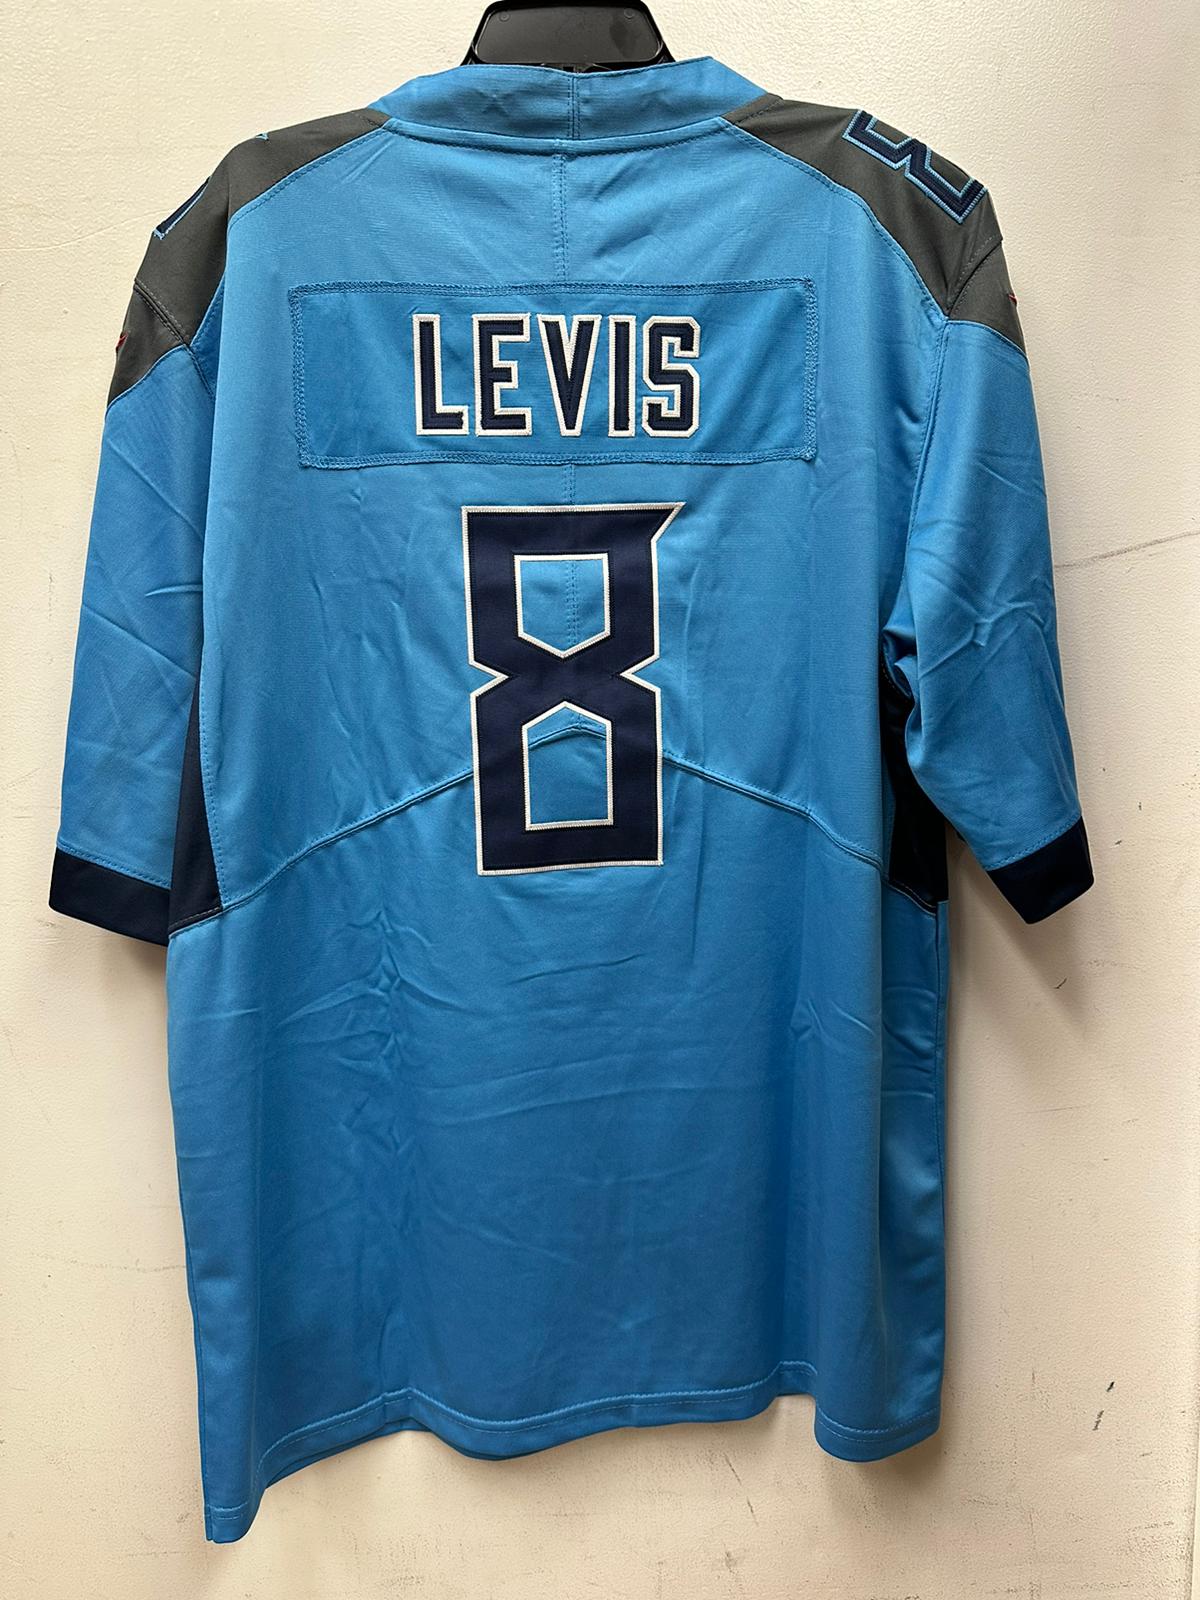 Levis Will youth jersey